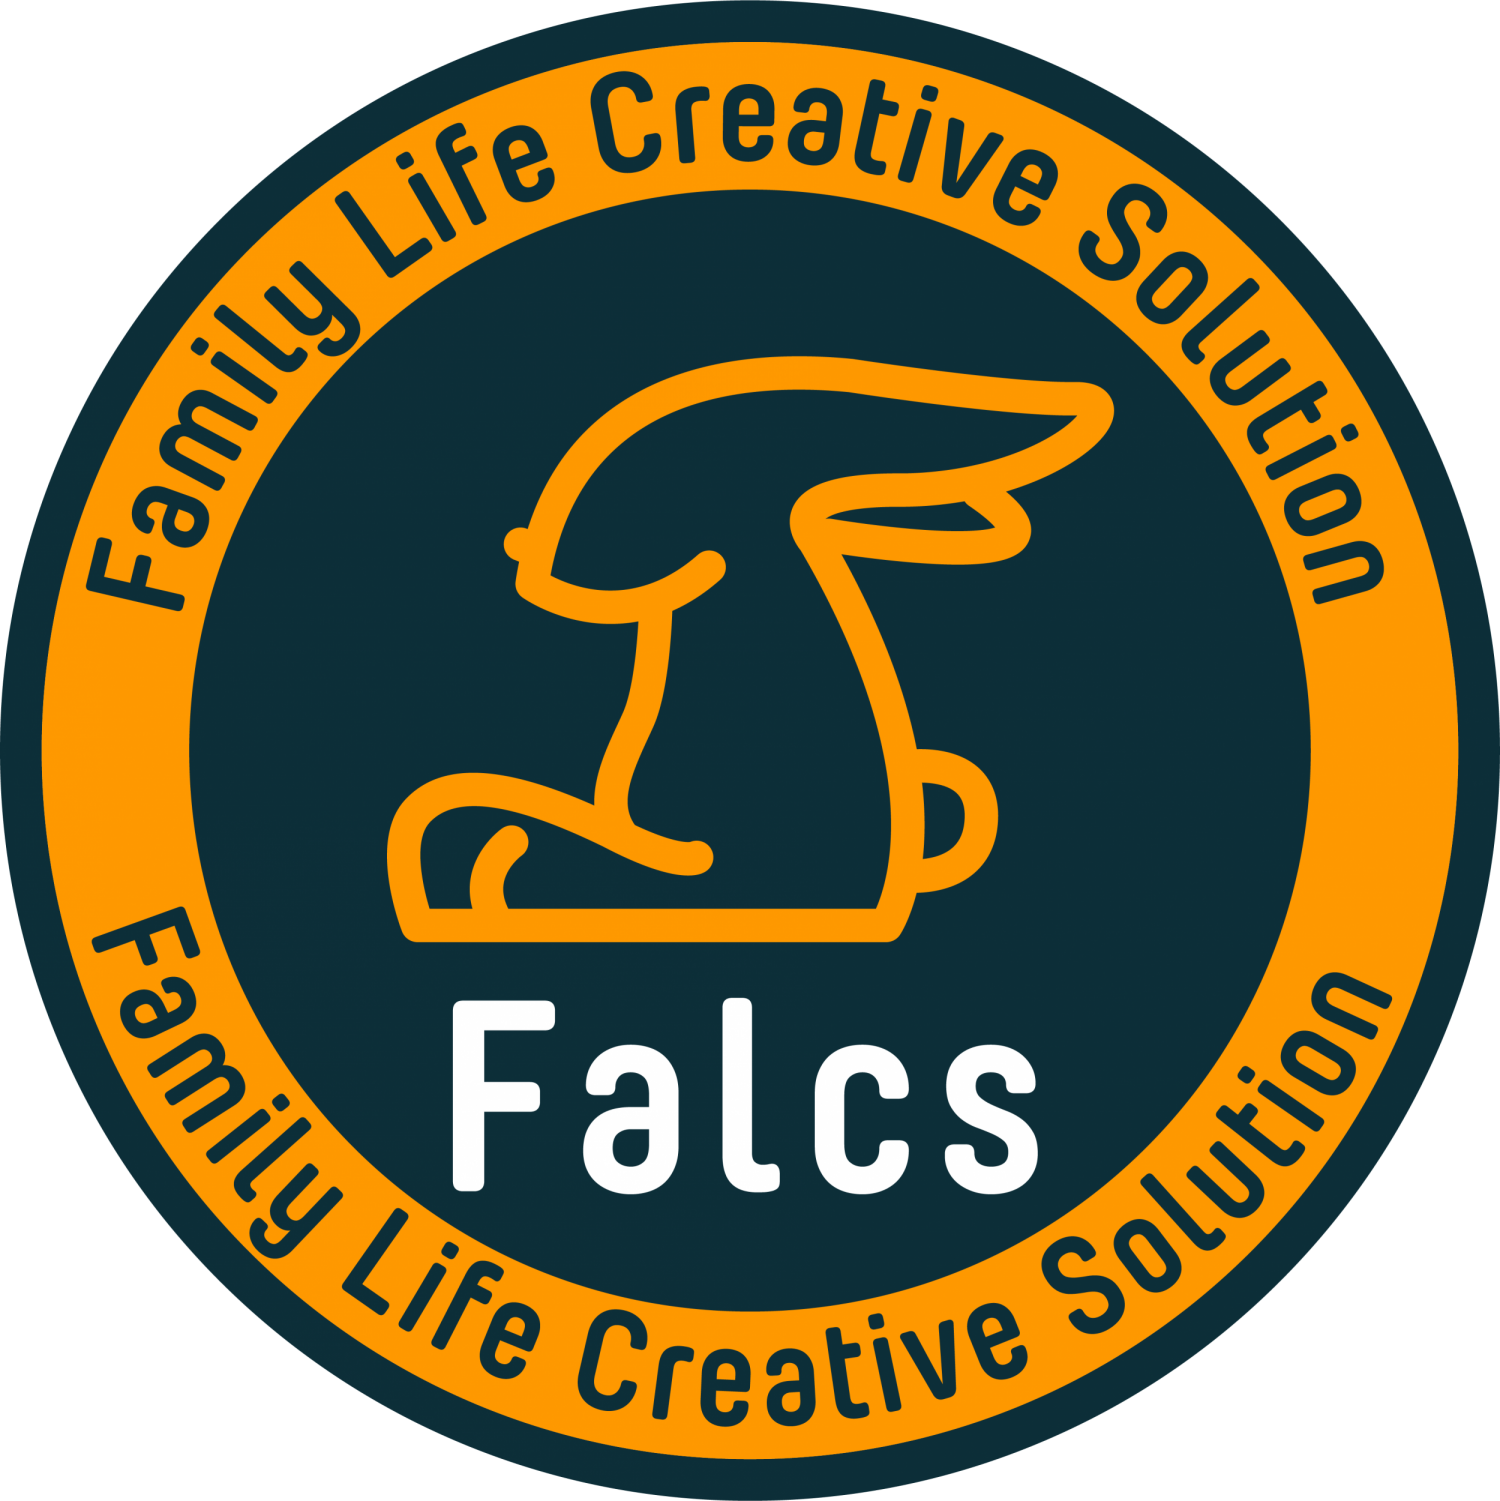 <h2 class="concept_title">Family Life Creative Solution</h2>